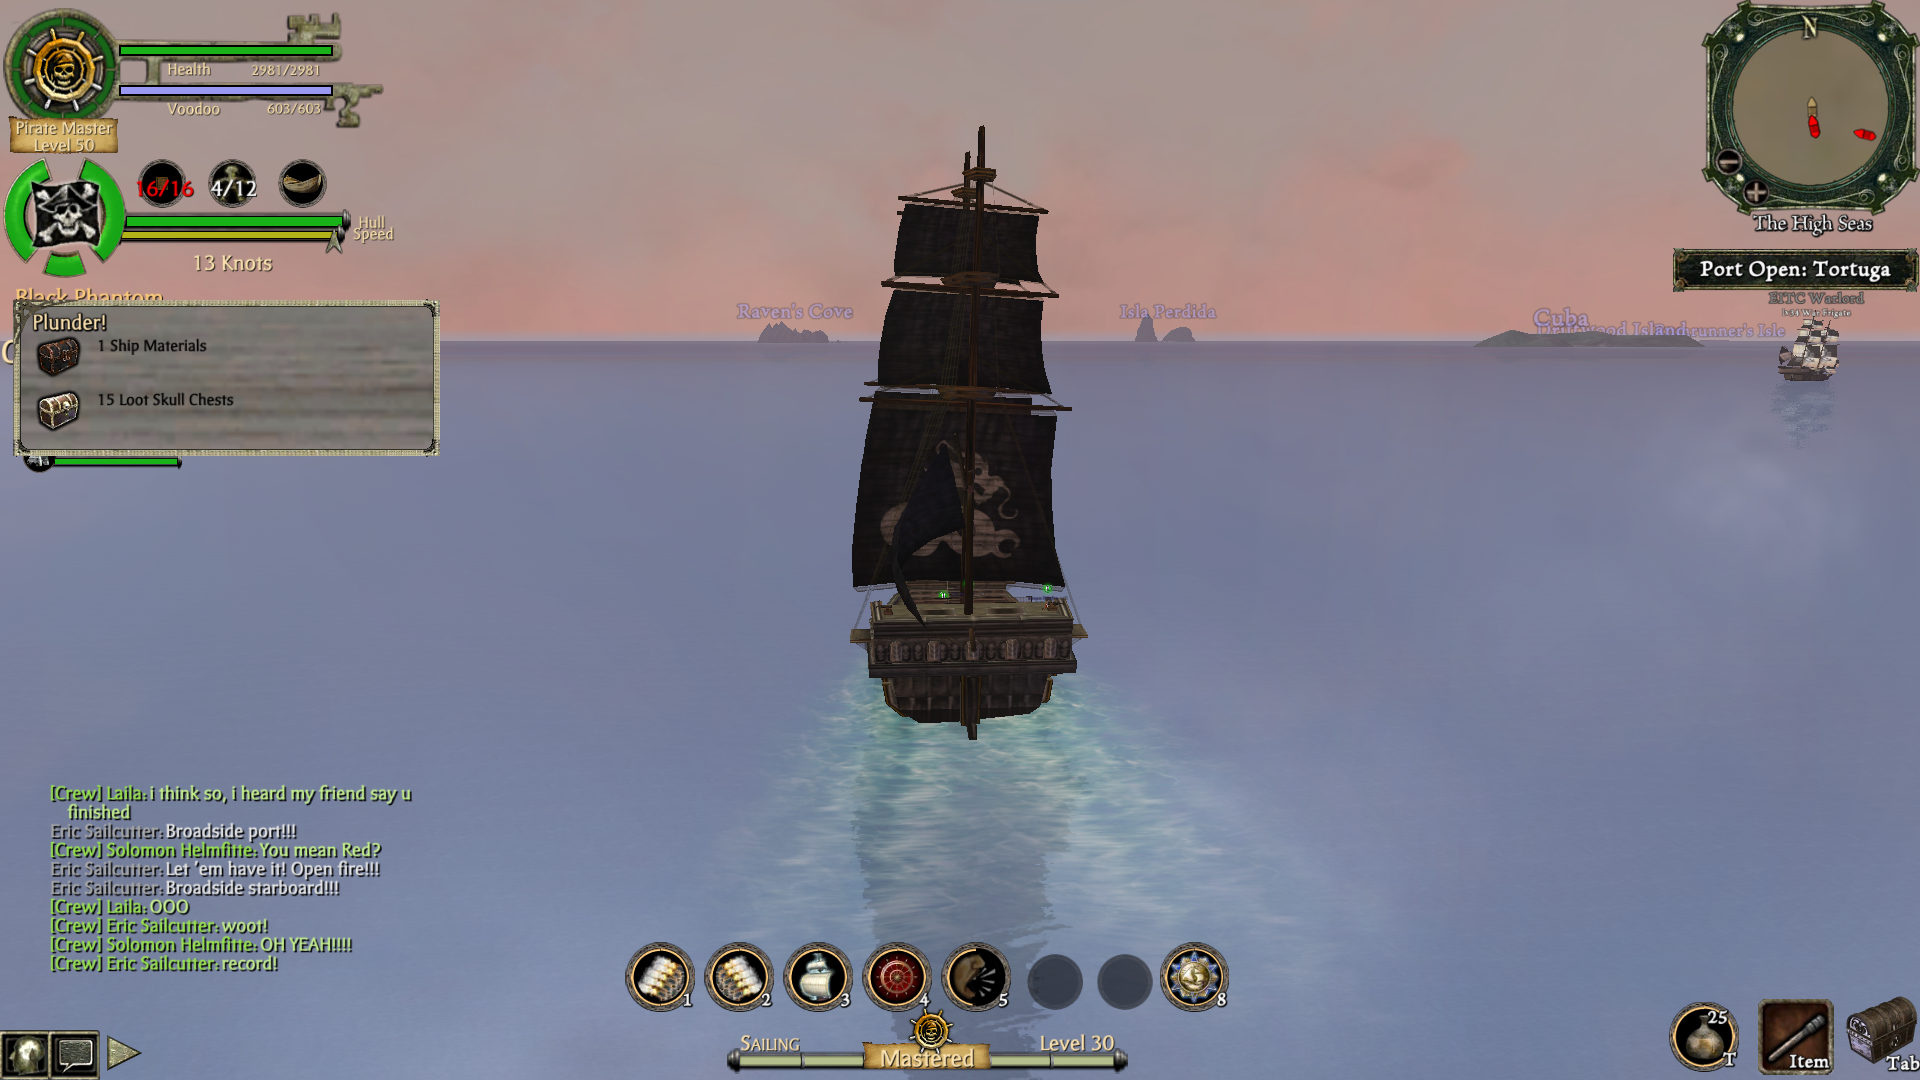 TLOPO 15 Loot Skull Chests sailing.png